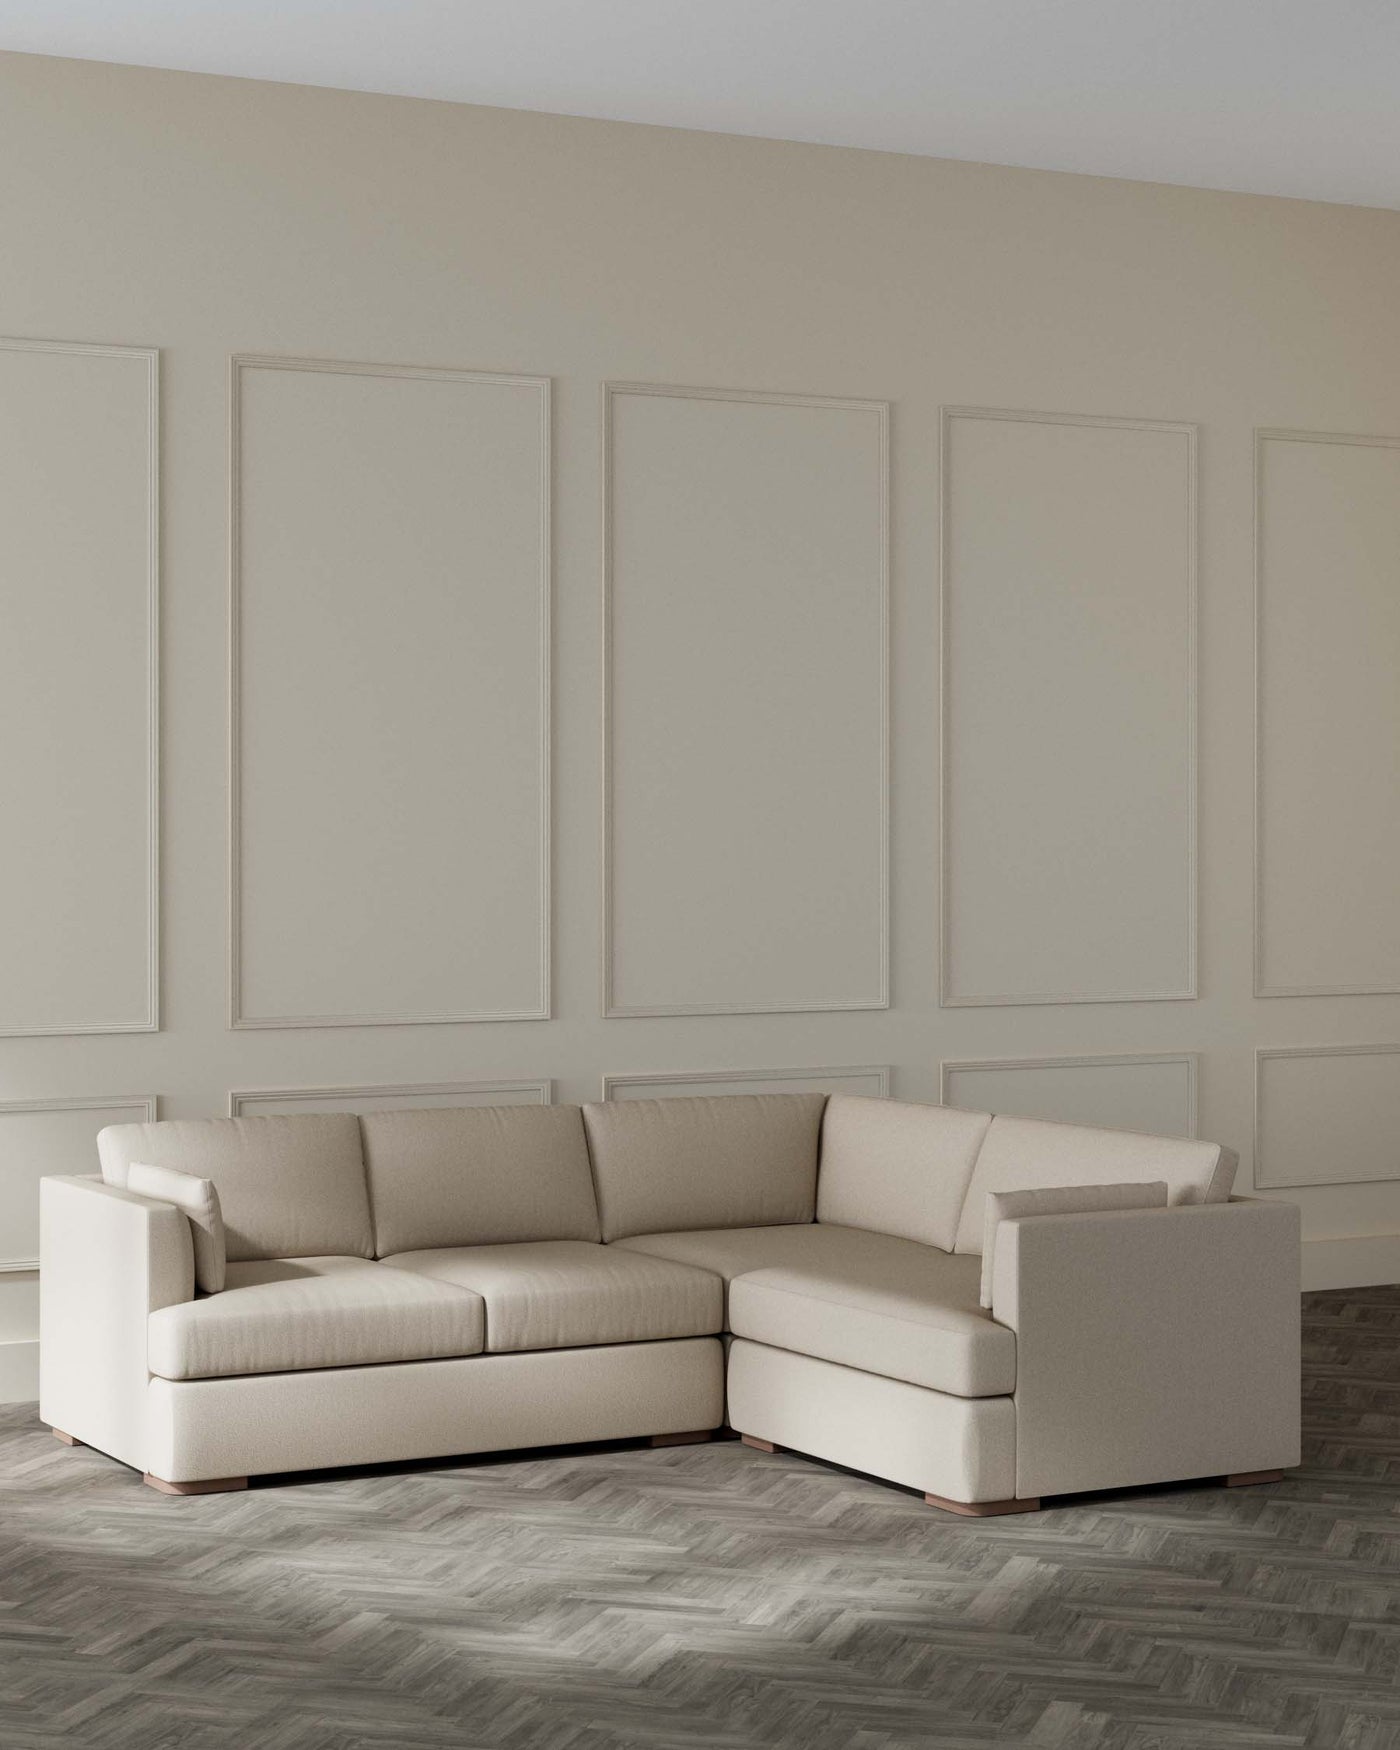 Modern beige L-shaped sectional sofa with clean lines and plush cushions, featuring a chaise lounge on the right side, set against a wall with elegant panelling in a neutral-toned room with herringbone wooden flooring.